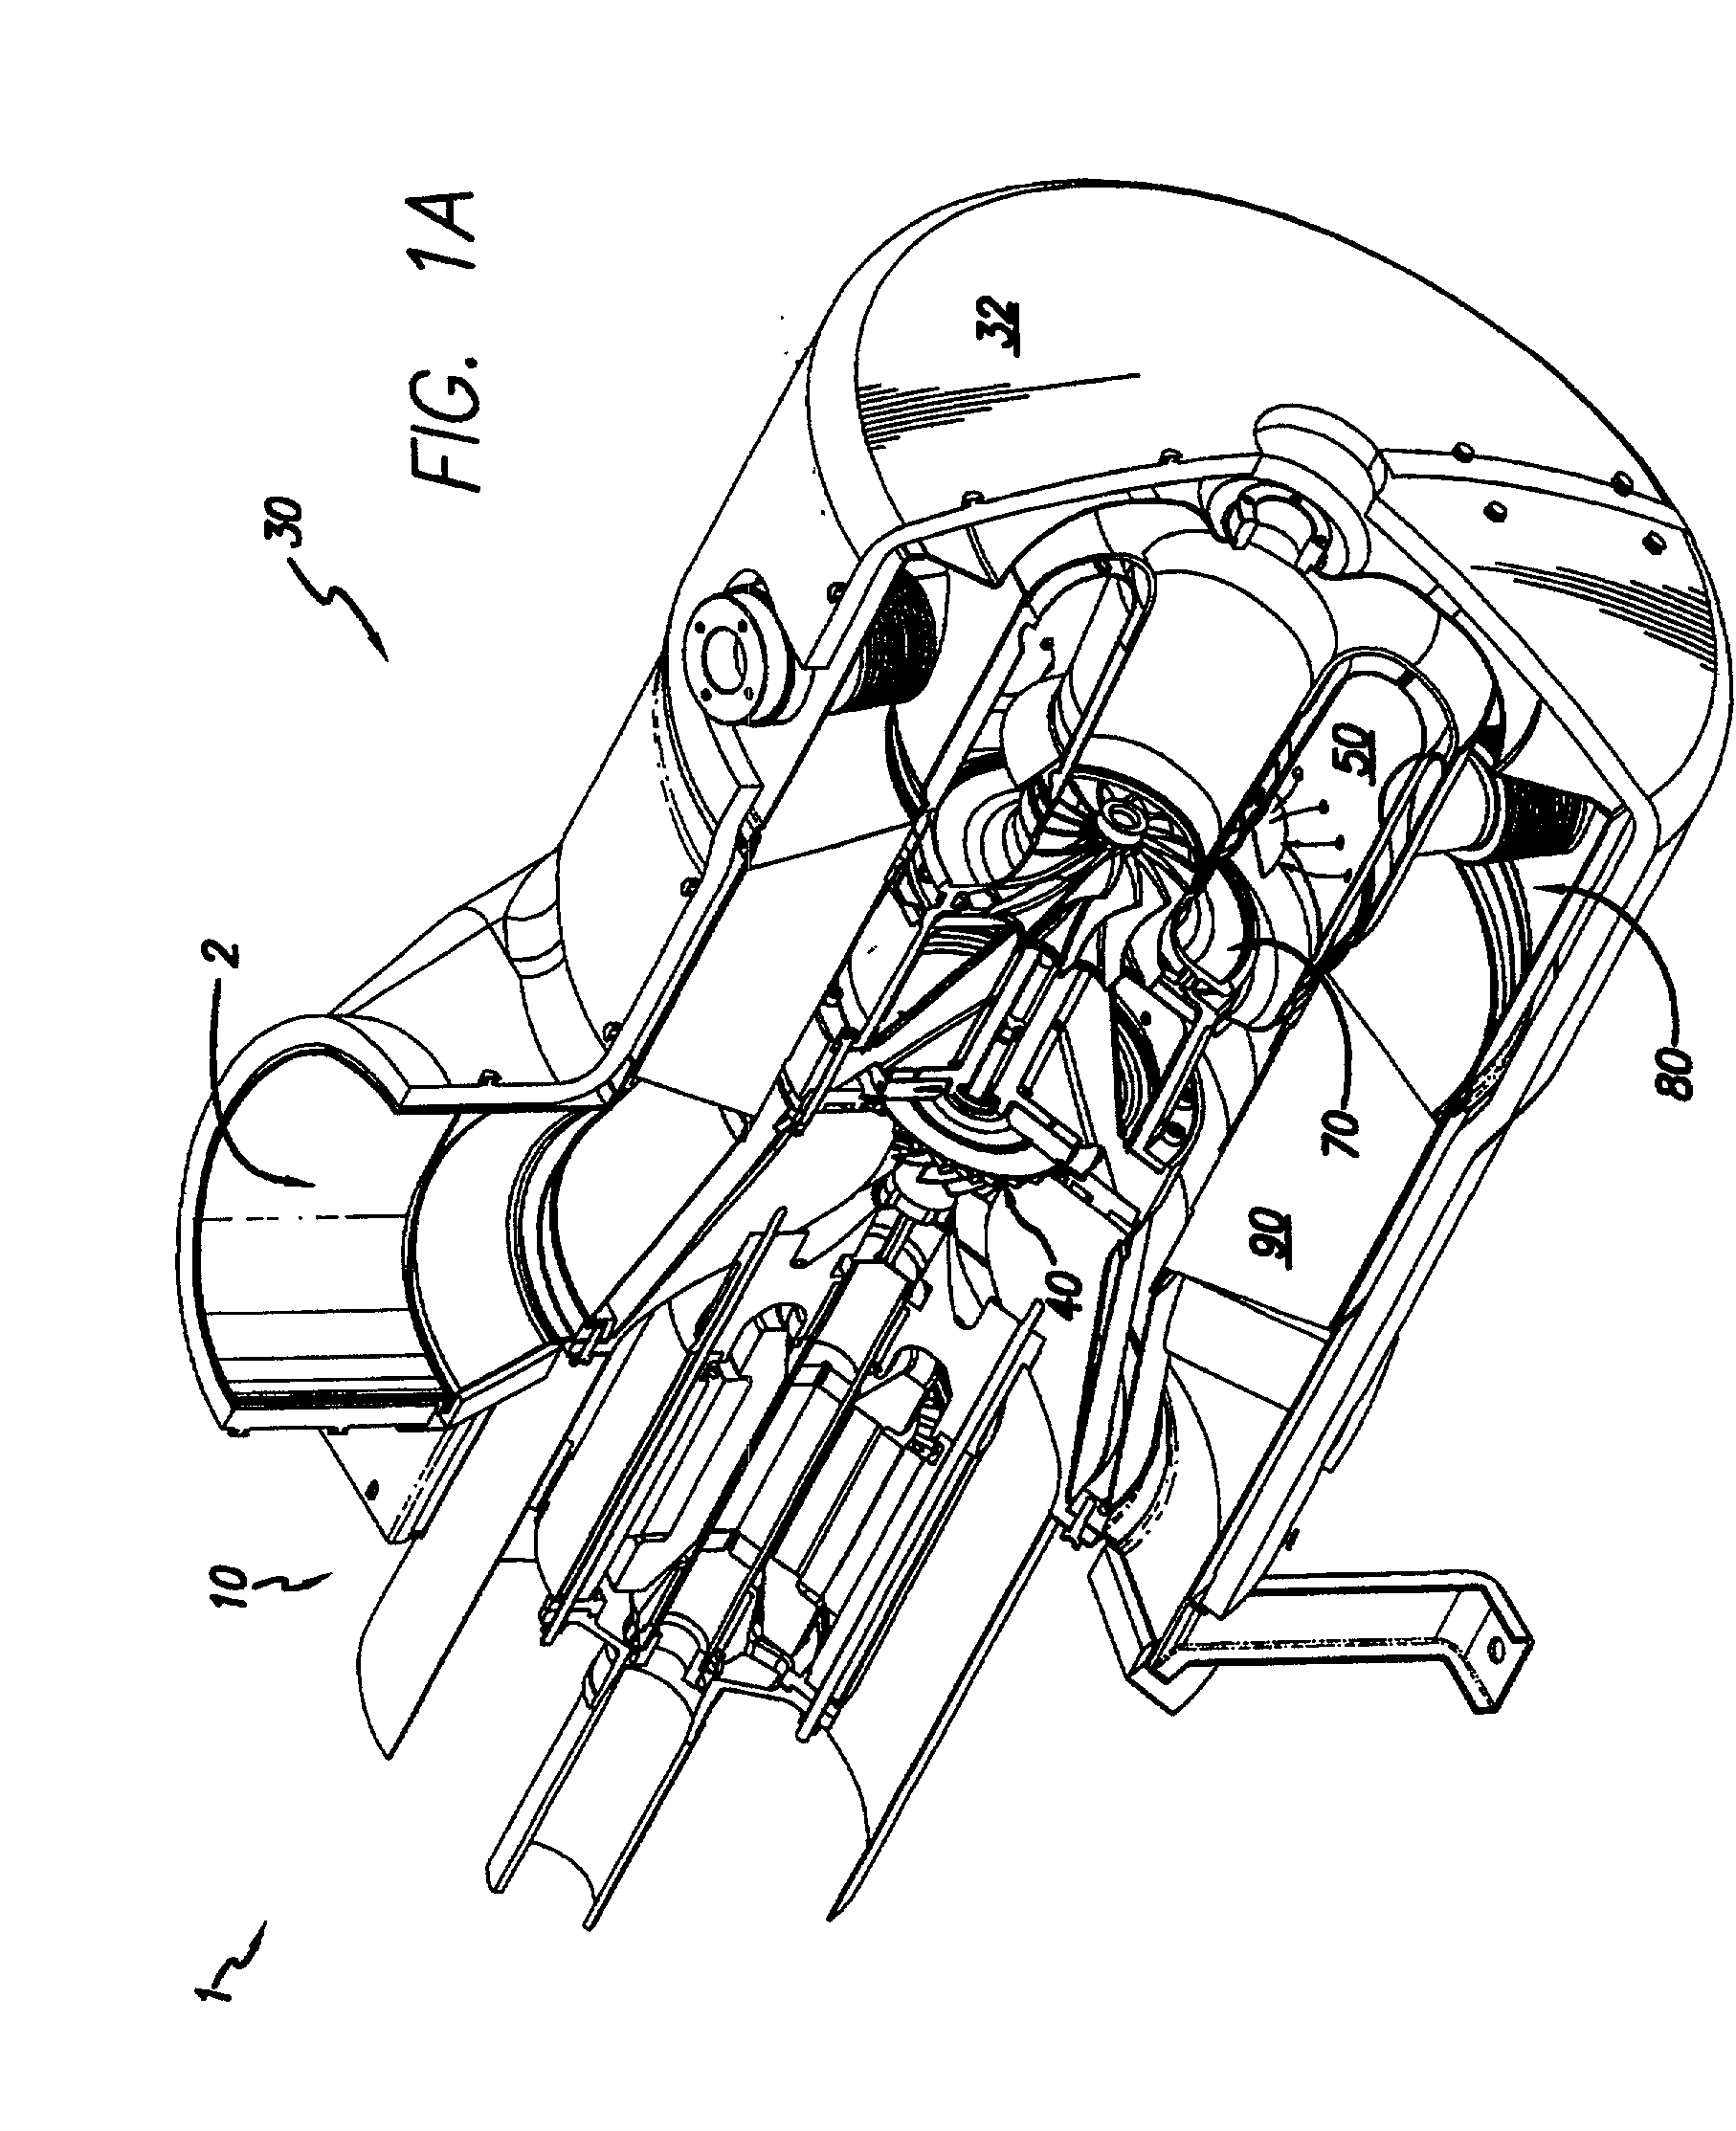 Rotor shield for magnetic rotary machine